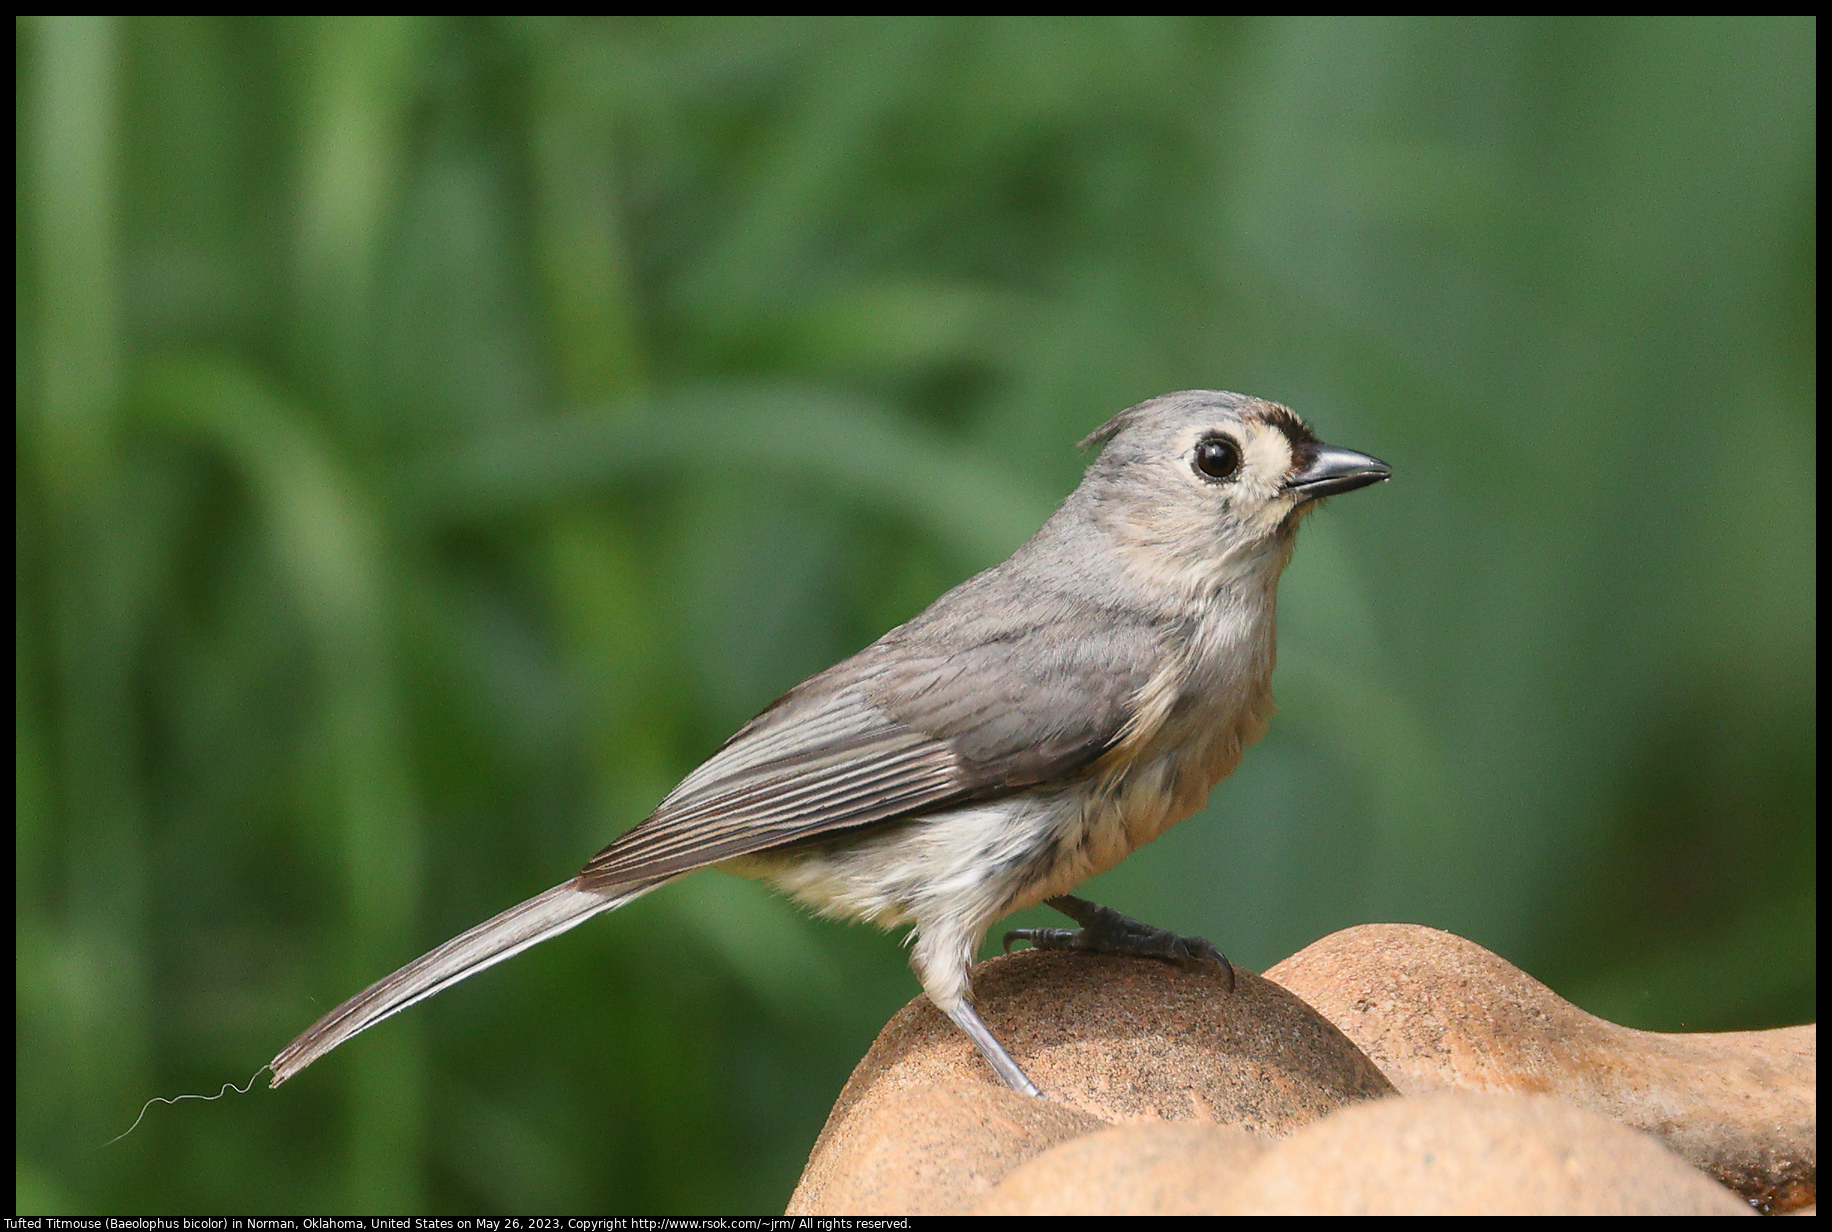 Tufted Titmouse (Baeolophus bicolor) in Norman, Oklahoma, United States on May 26, 2023